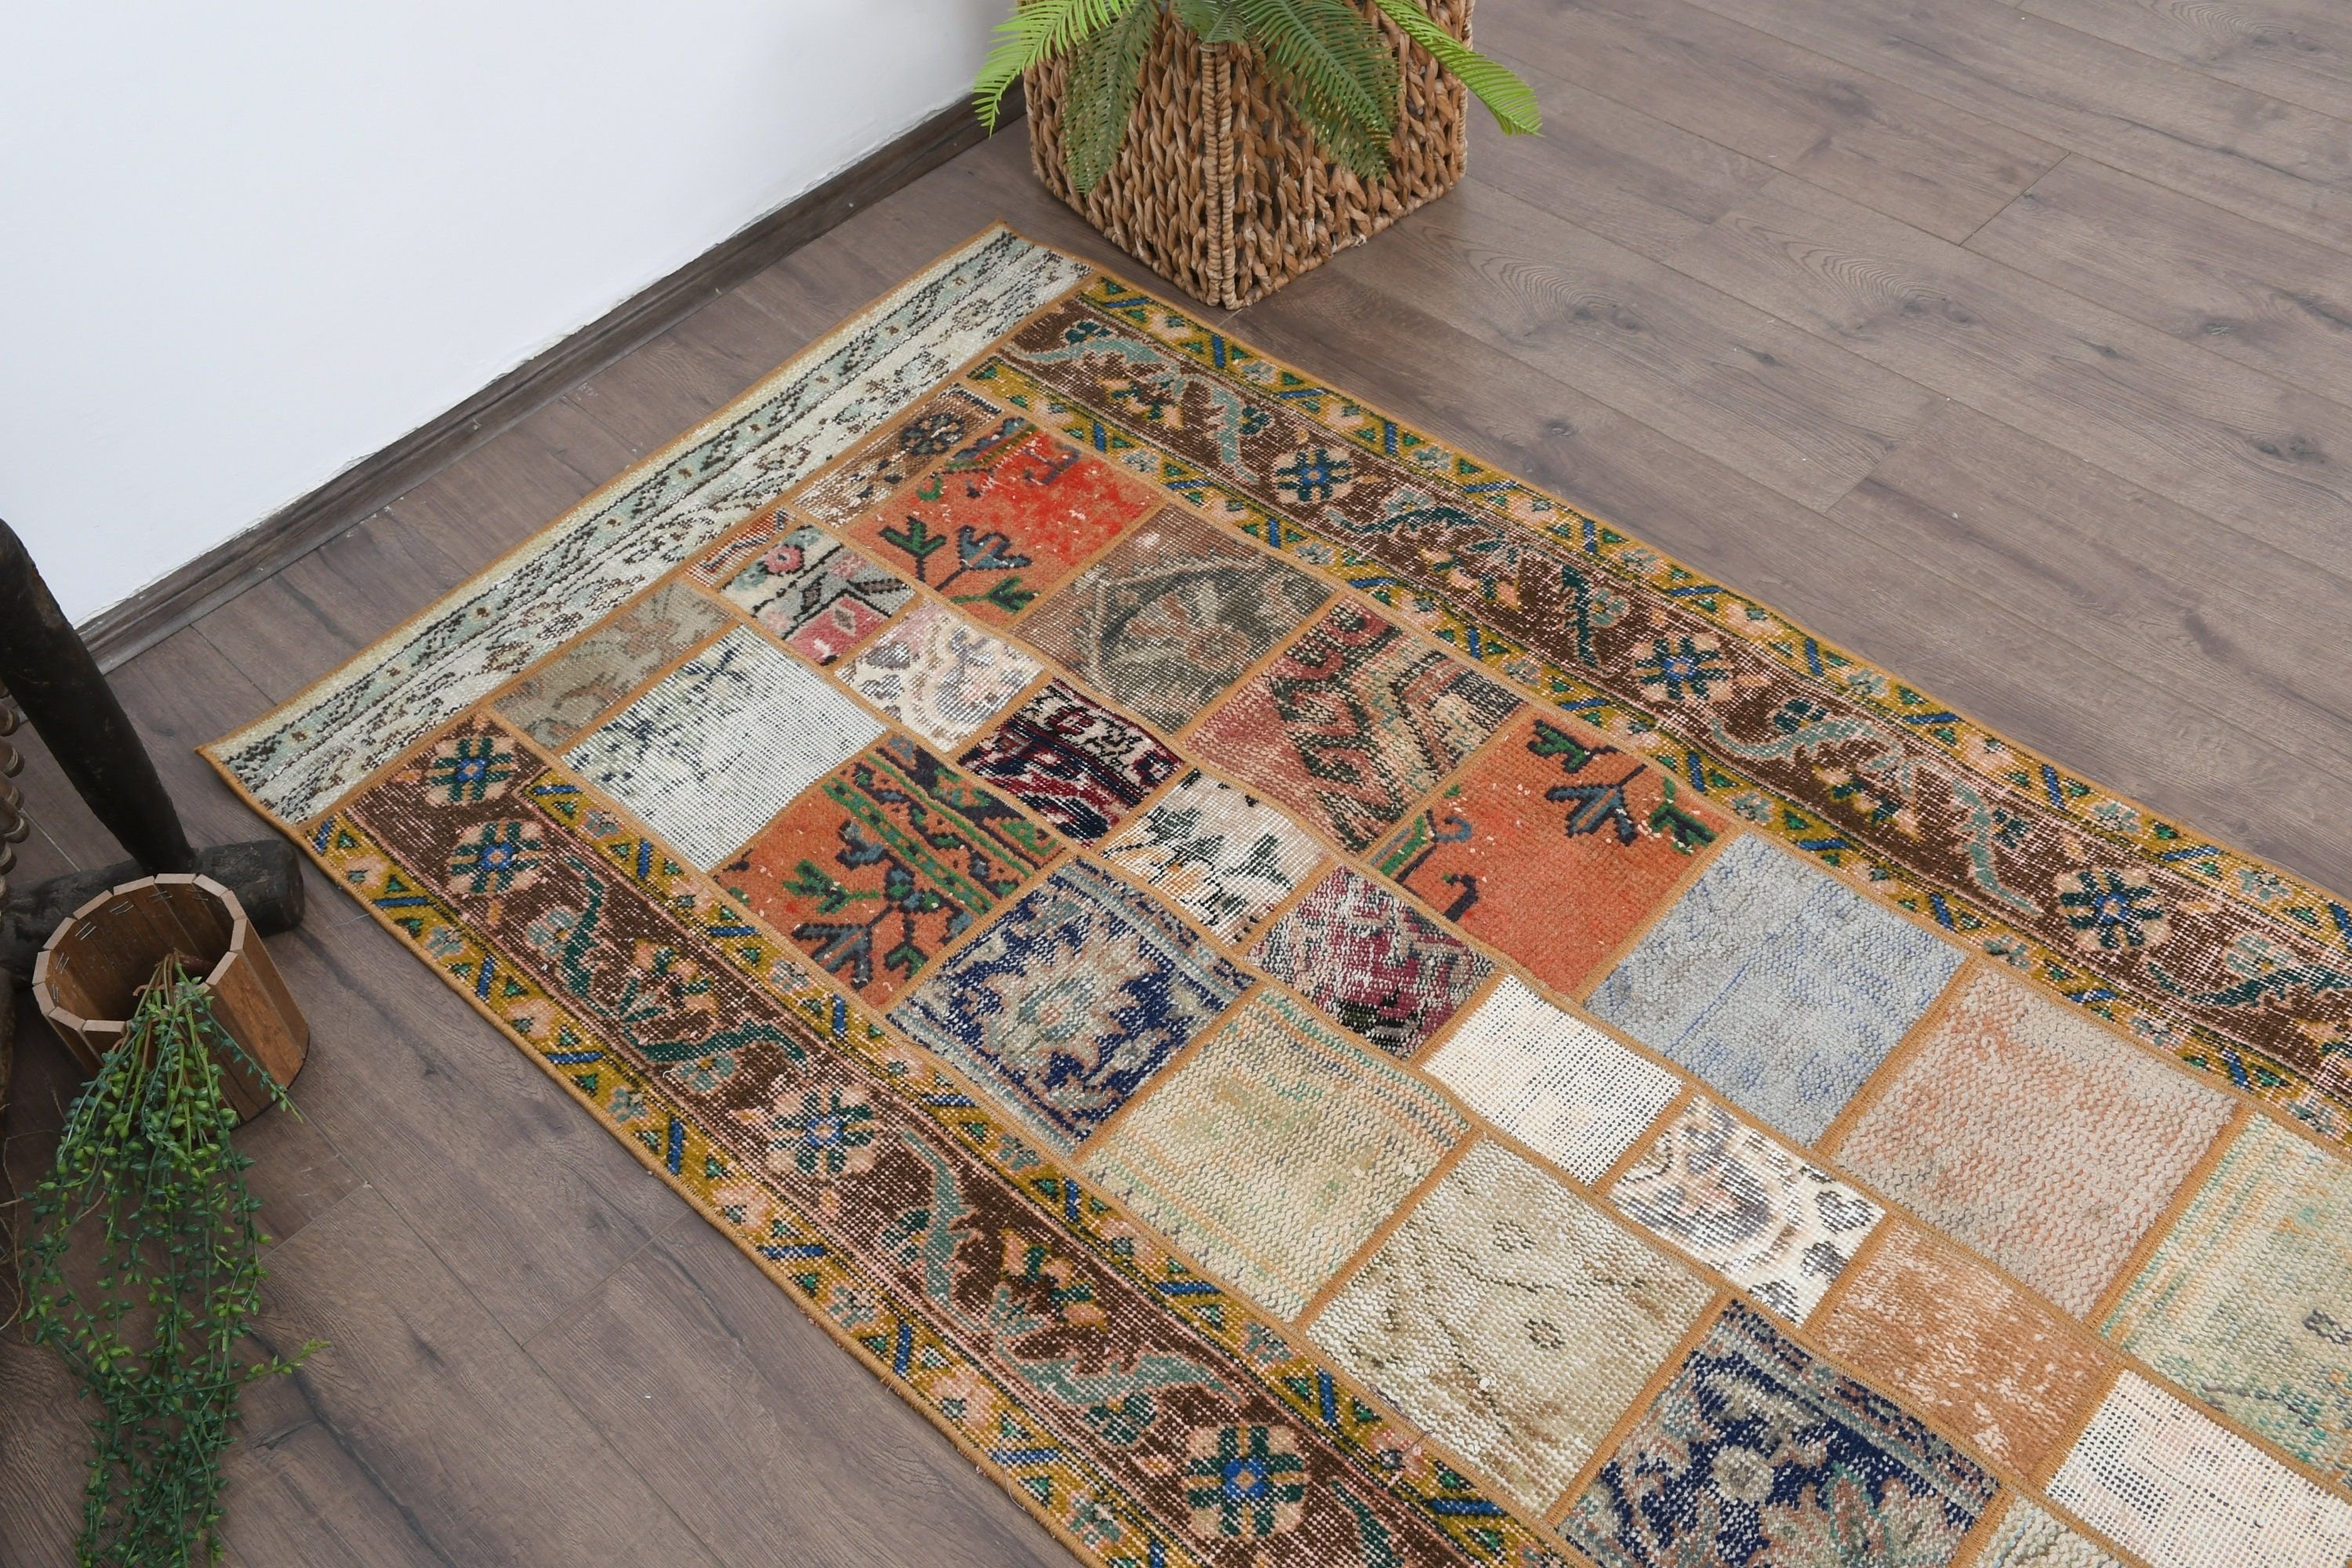 Bedroom Rug, Entry Rugs, Home Decor Rug, Vintage Rug, Anatolian Rugs, Dorm Rugs, Rainbow Antique Rug, 2.9x6.8 ft Accent Rugs, Turkish Rugs